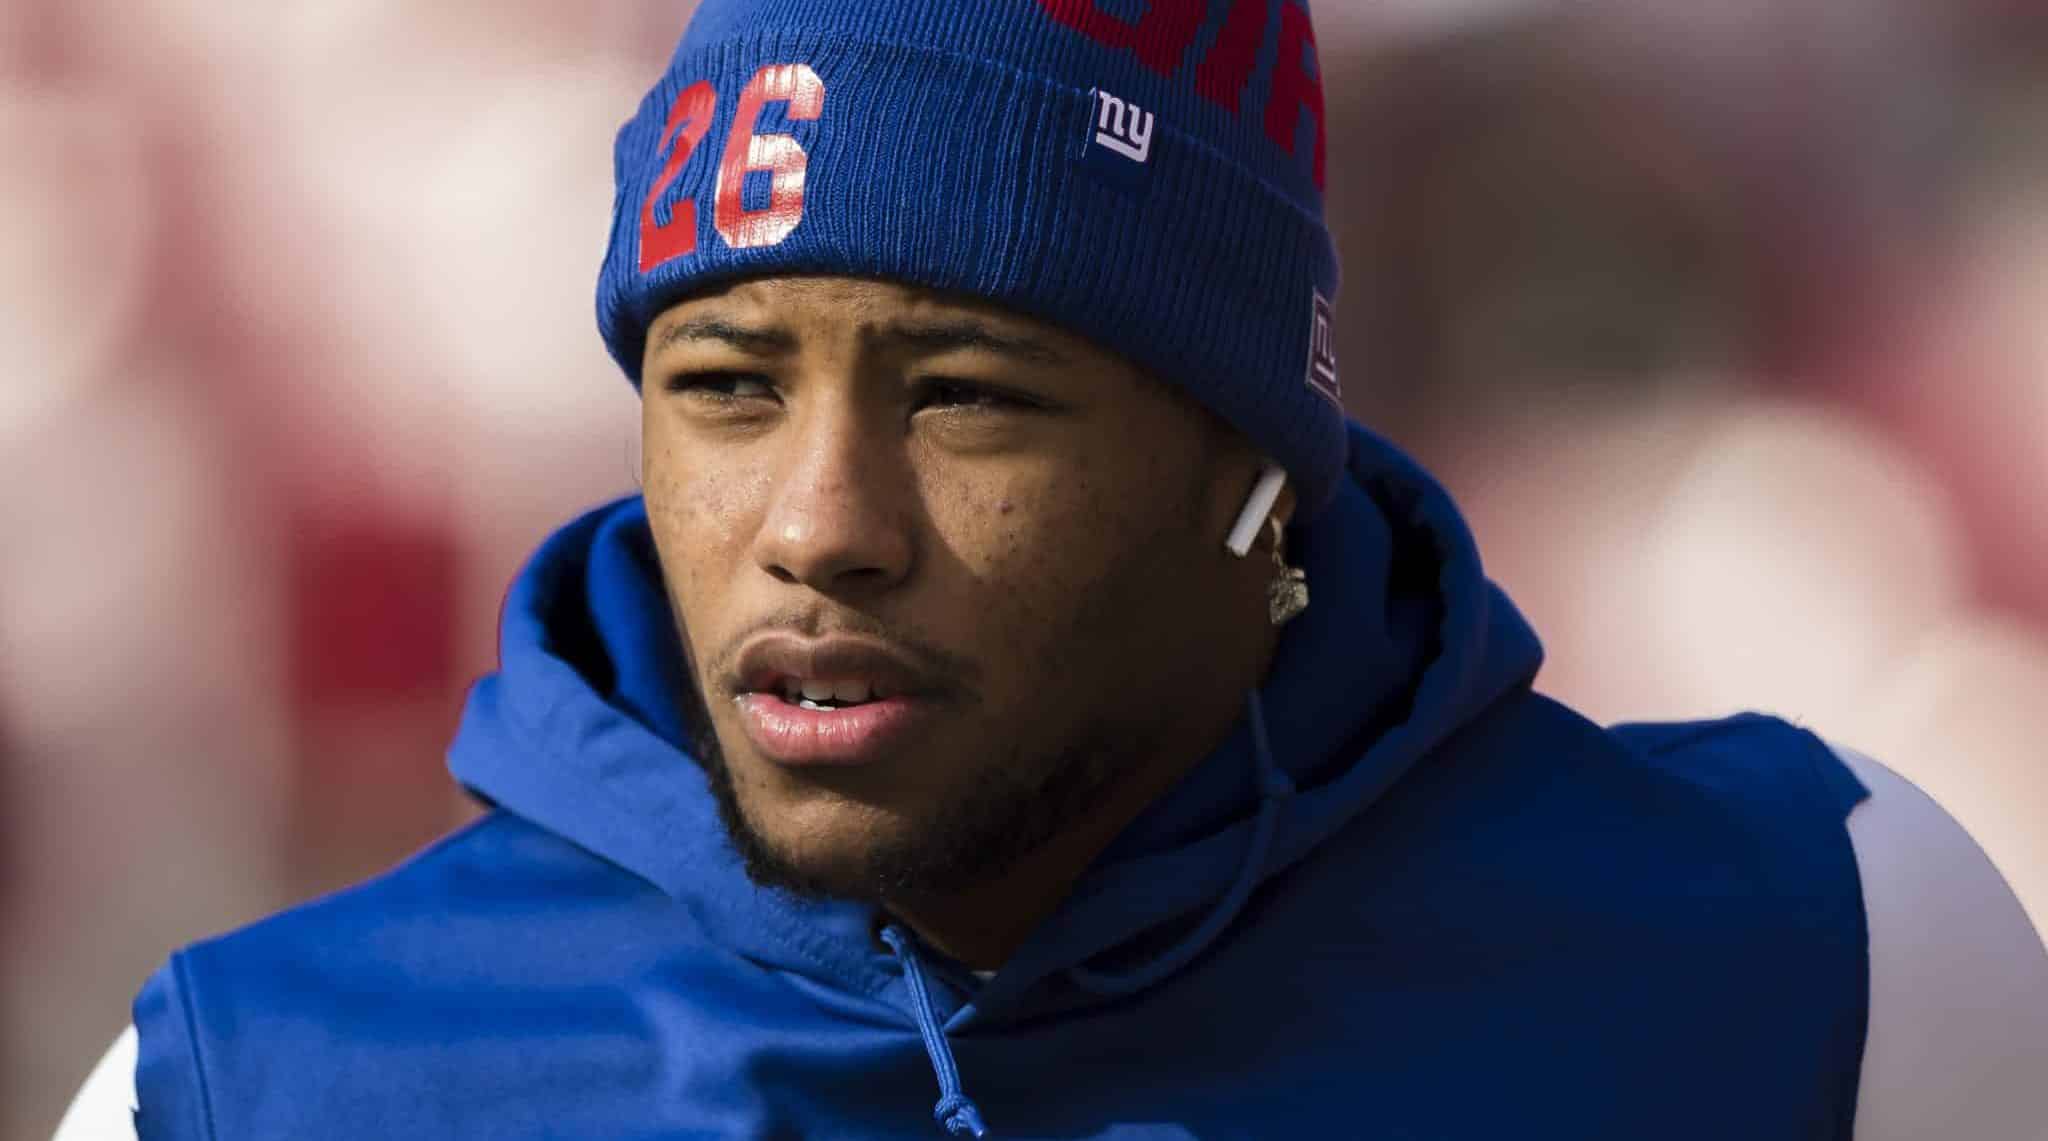 LANDOVER, MD - DECEMBER 22: Saquon Barkley #26 of the New York Giants takes the field before the game against the Washington Redskins at FedExField on December 22, 2019 in Landover, Maryland.